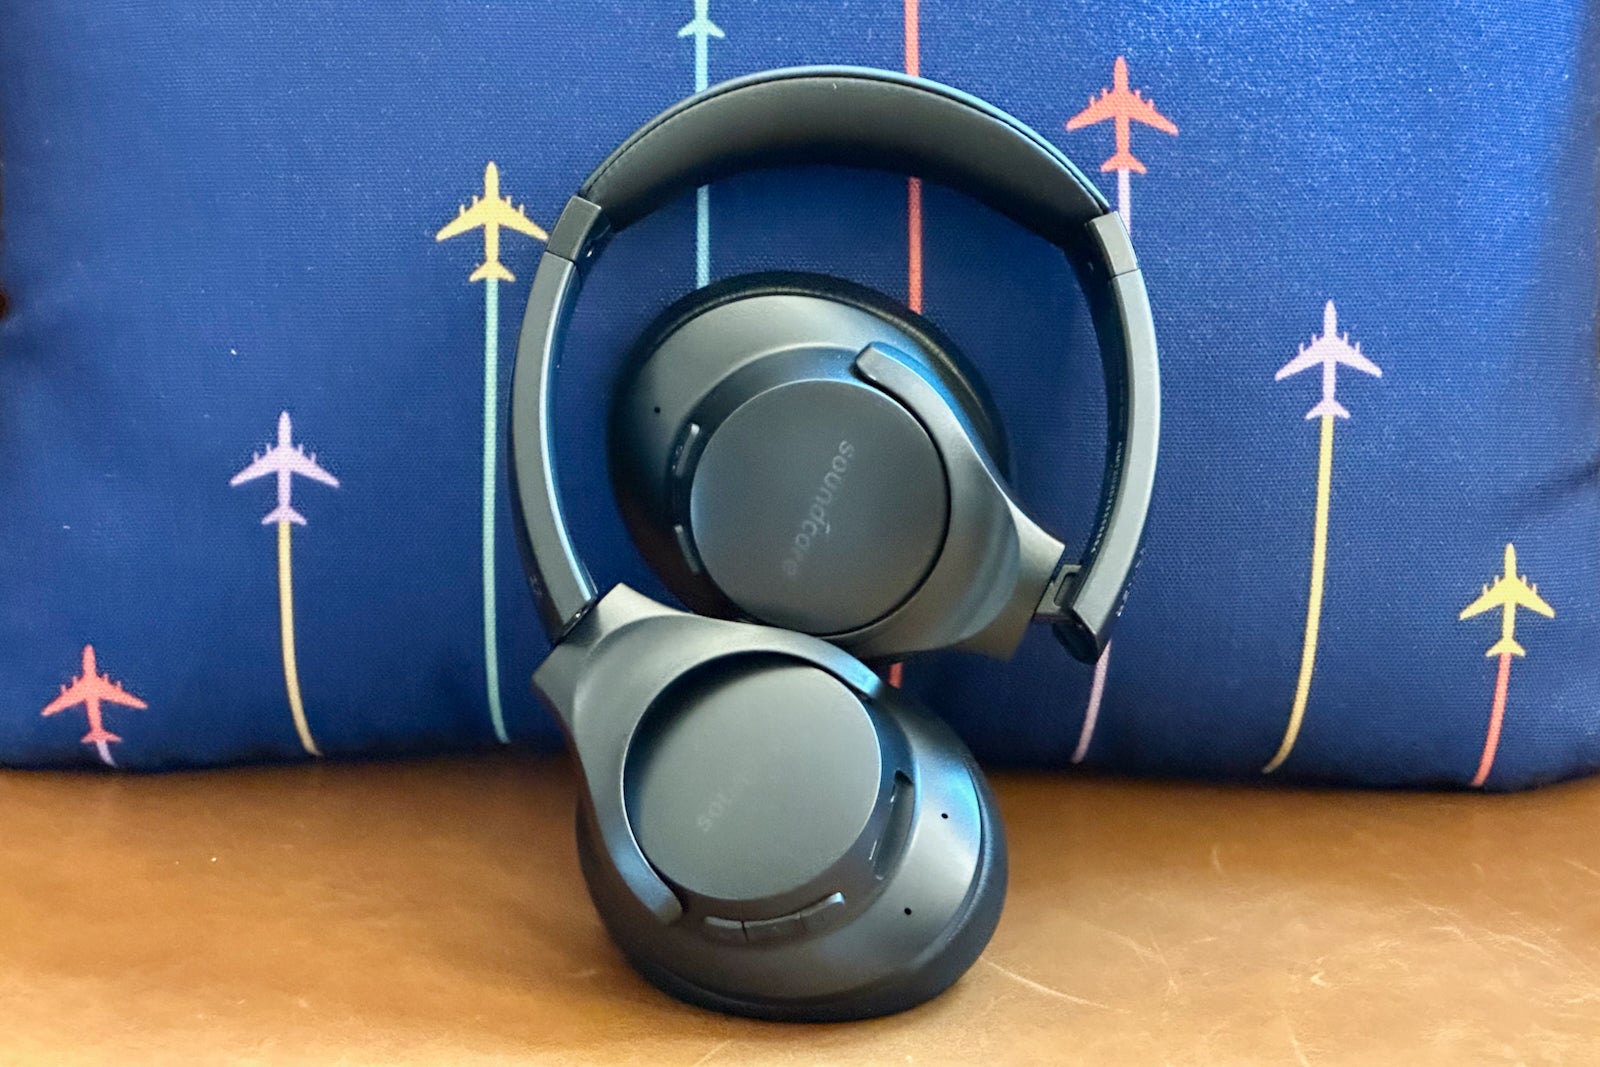 We tested the 6 best noise-canceling headphones for travel - The